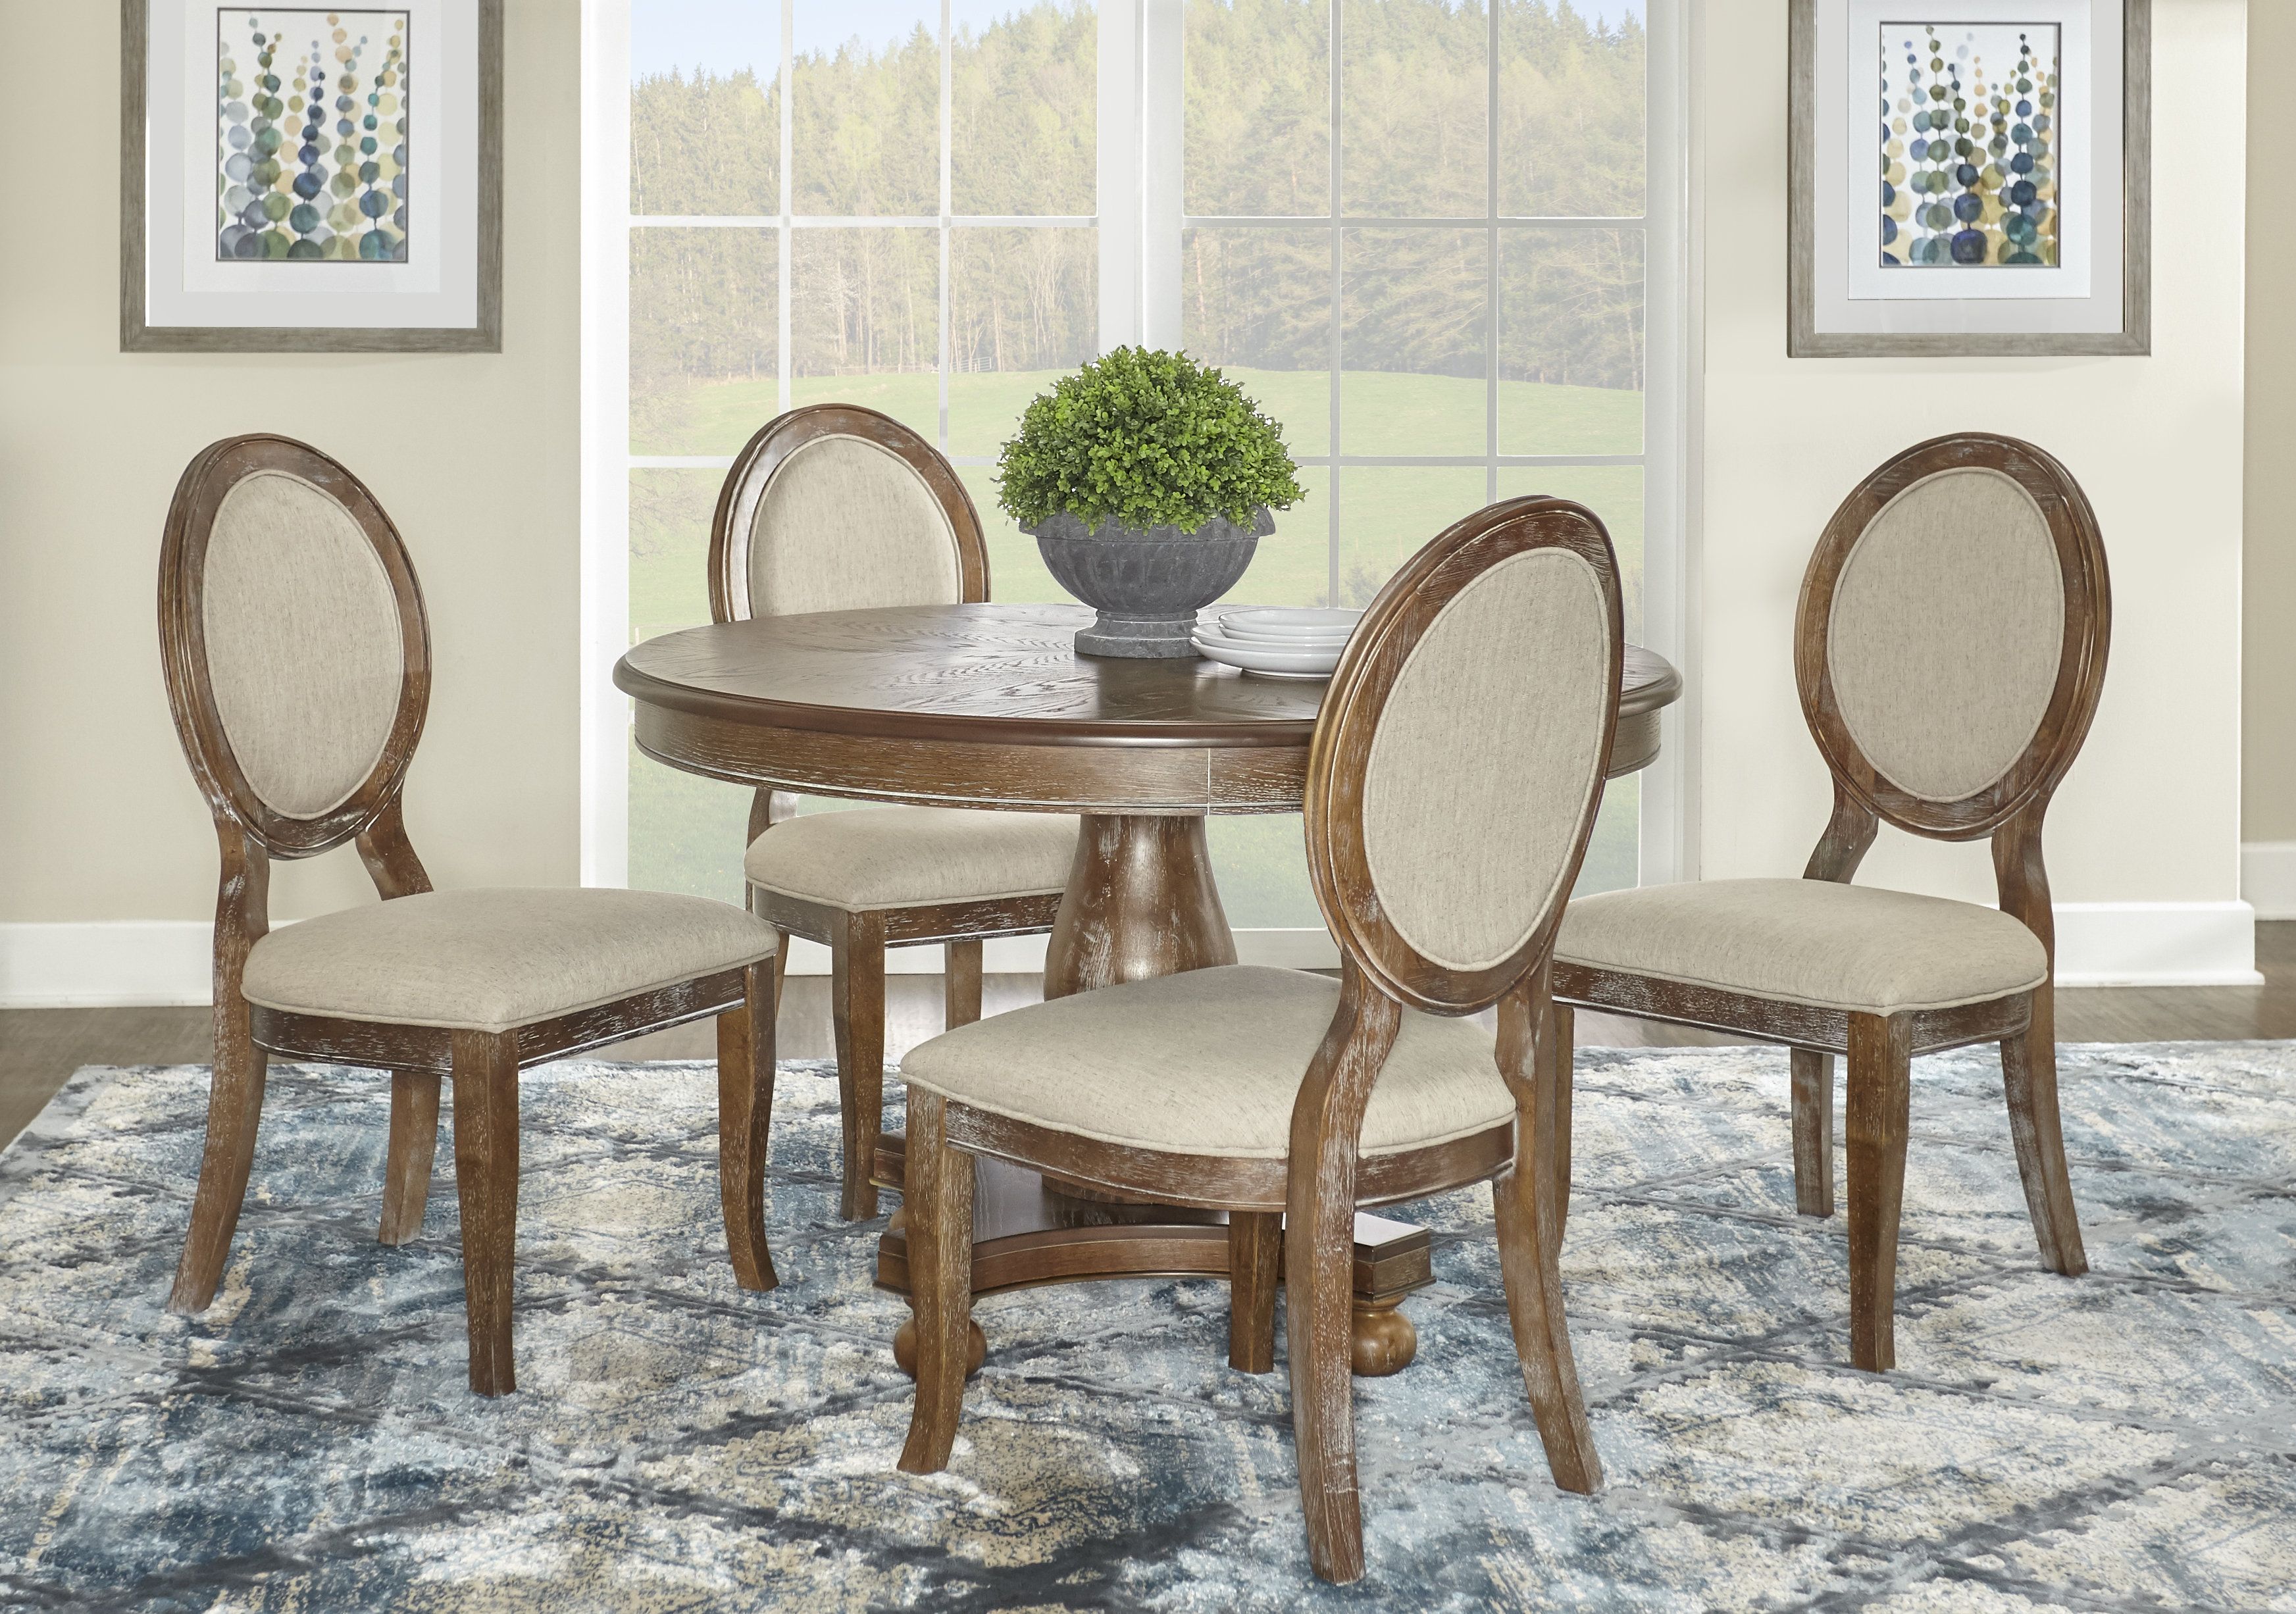 One Allium Way Hallows Creek 5 Piece Dining Set Pertaining To Most Recently Released Baxton Studio Keitaro 5 Piece Dining Sets (View 6 of 20)